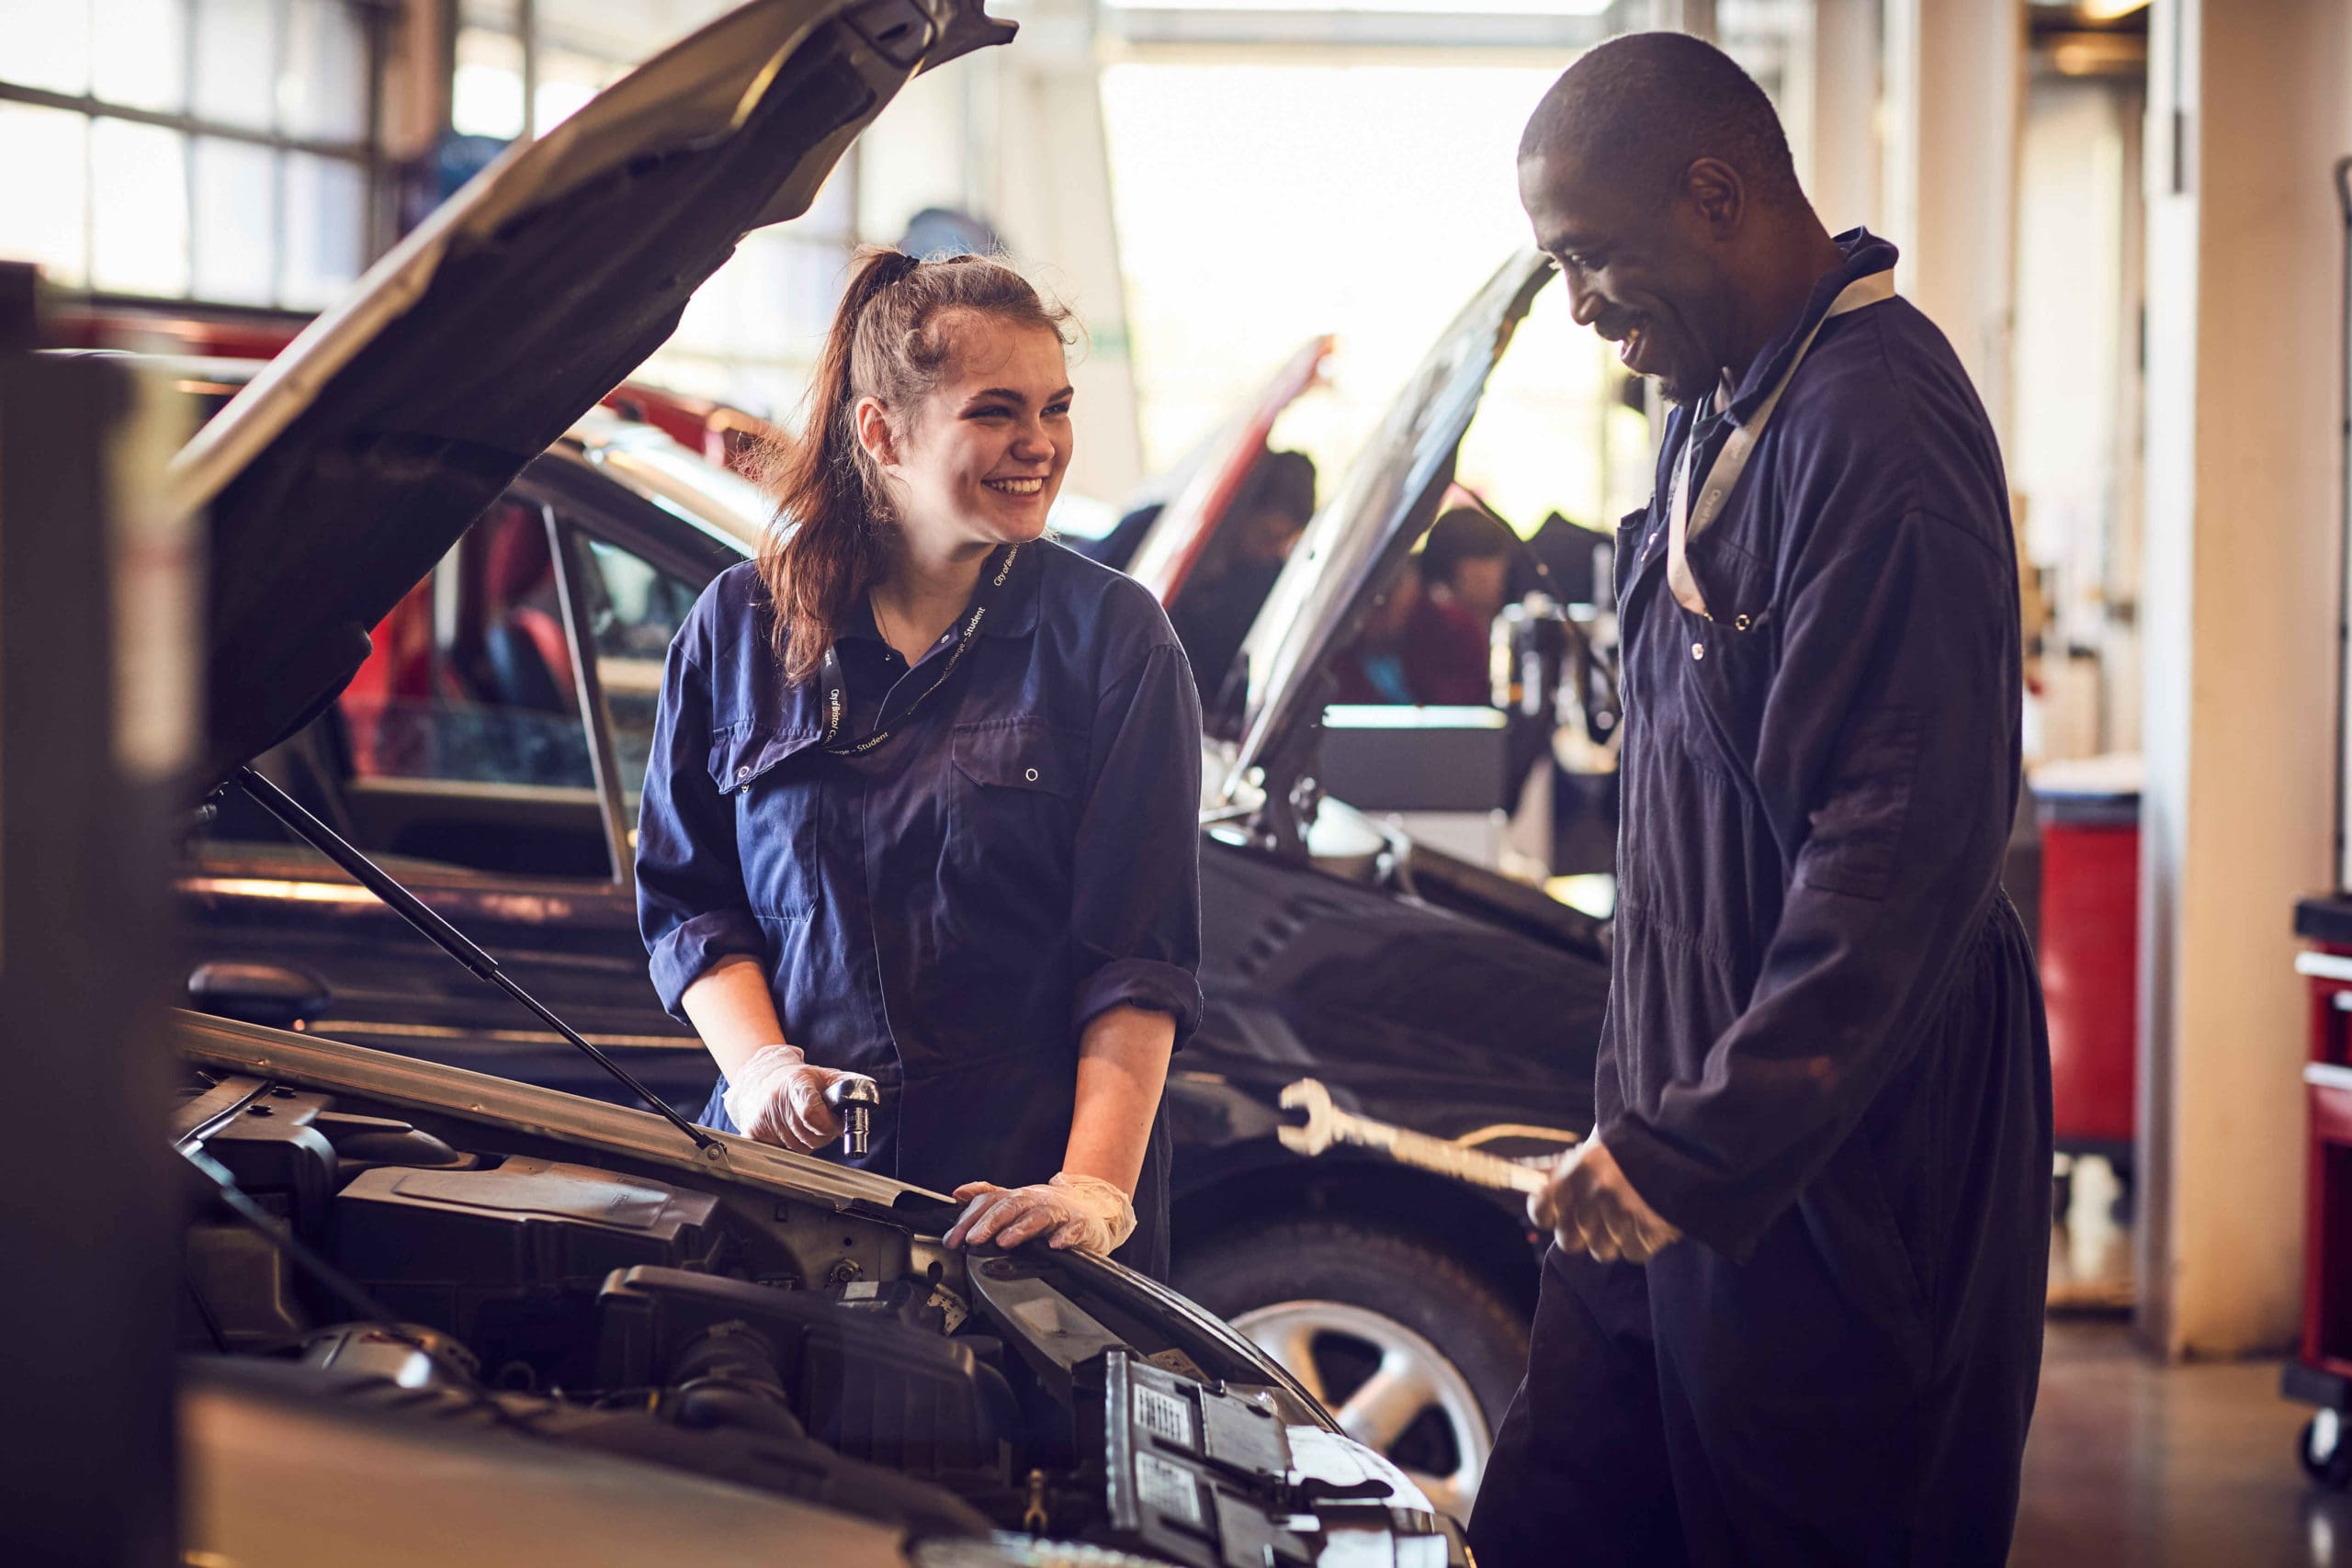 Two people working on car on a mechanics and motor vehicle course